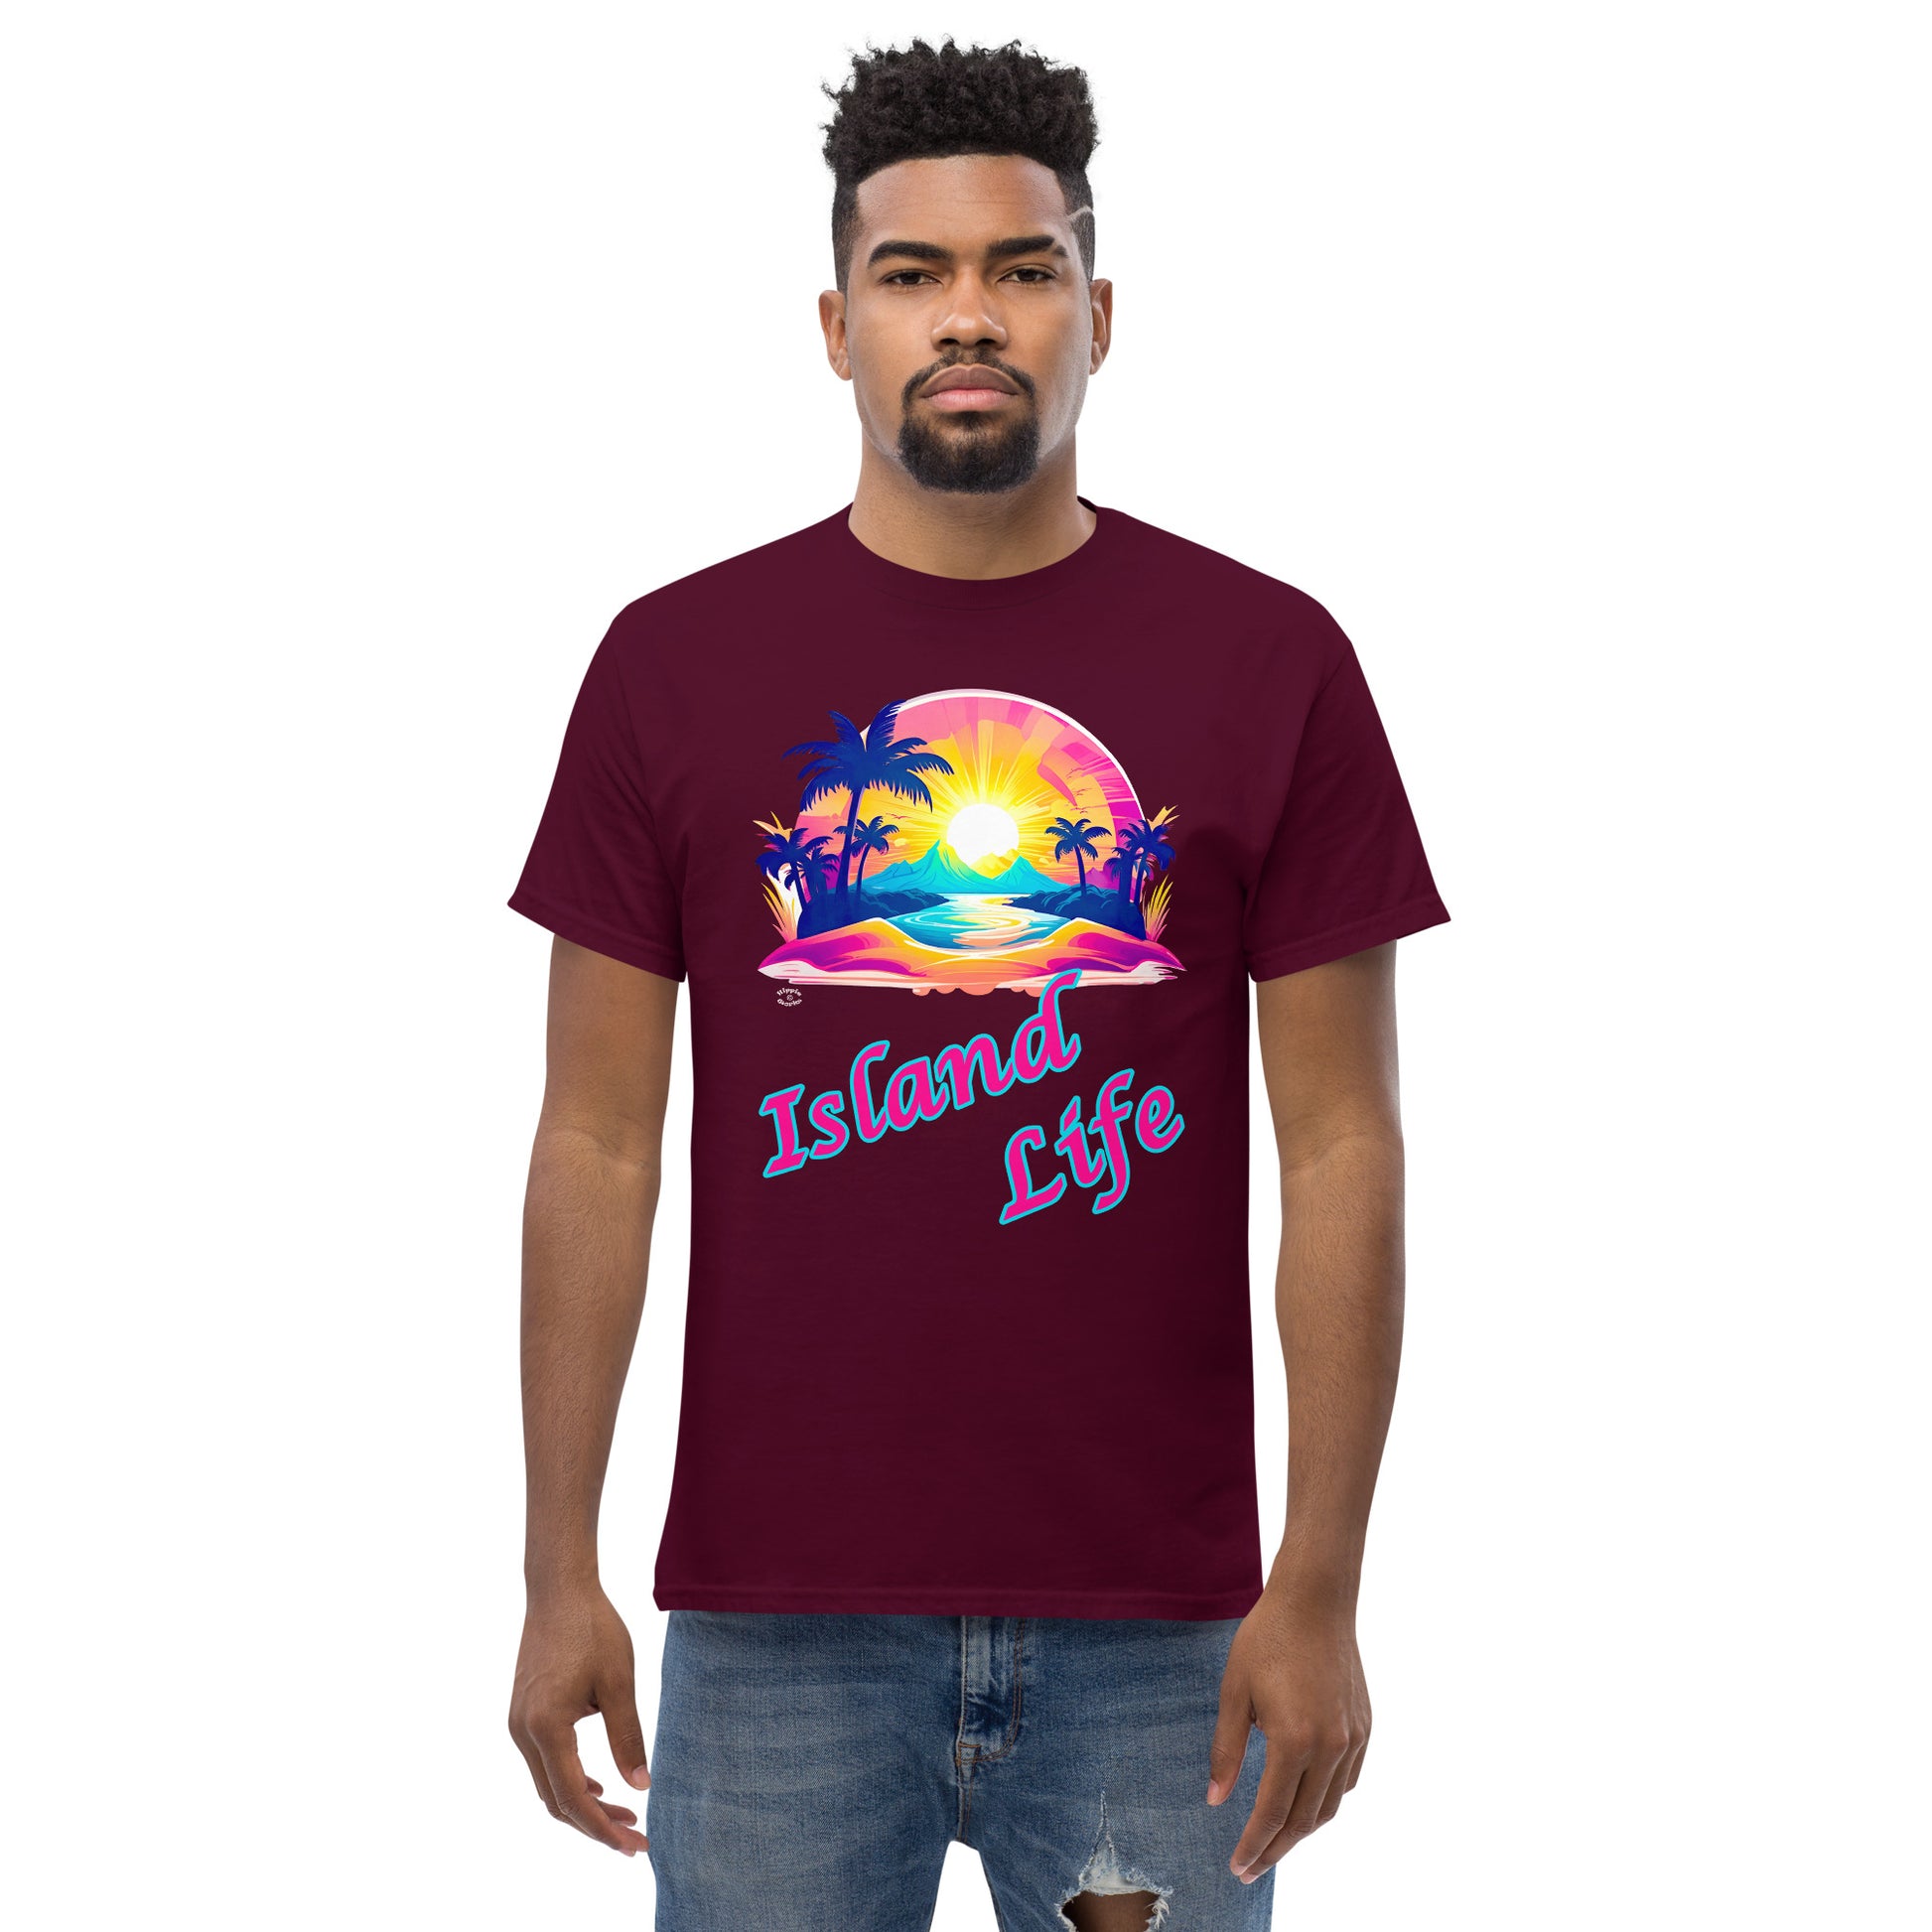 A picture of a man modeling a Men's Classic Tee / Tshirt with a large picture on the front of a tropical island paradise and the text Island Life underneath - front - maroon